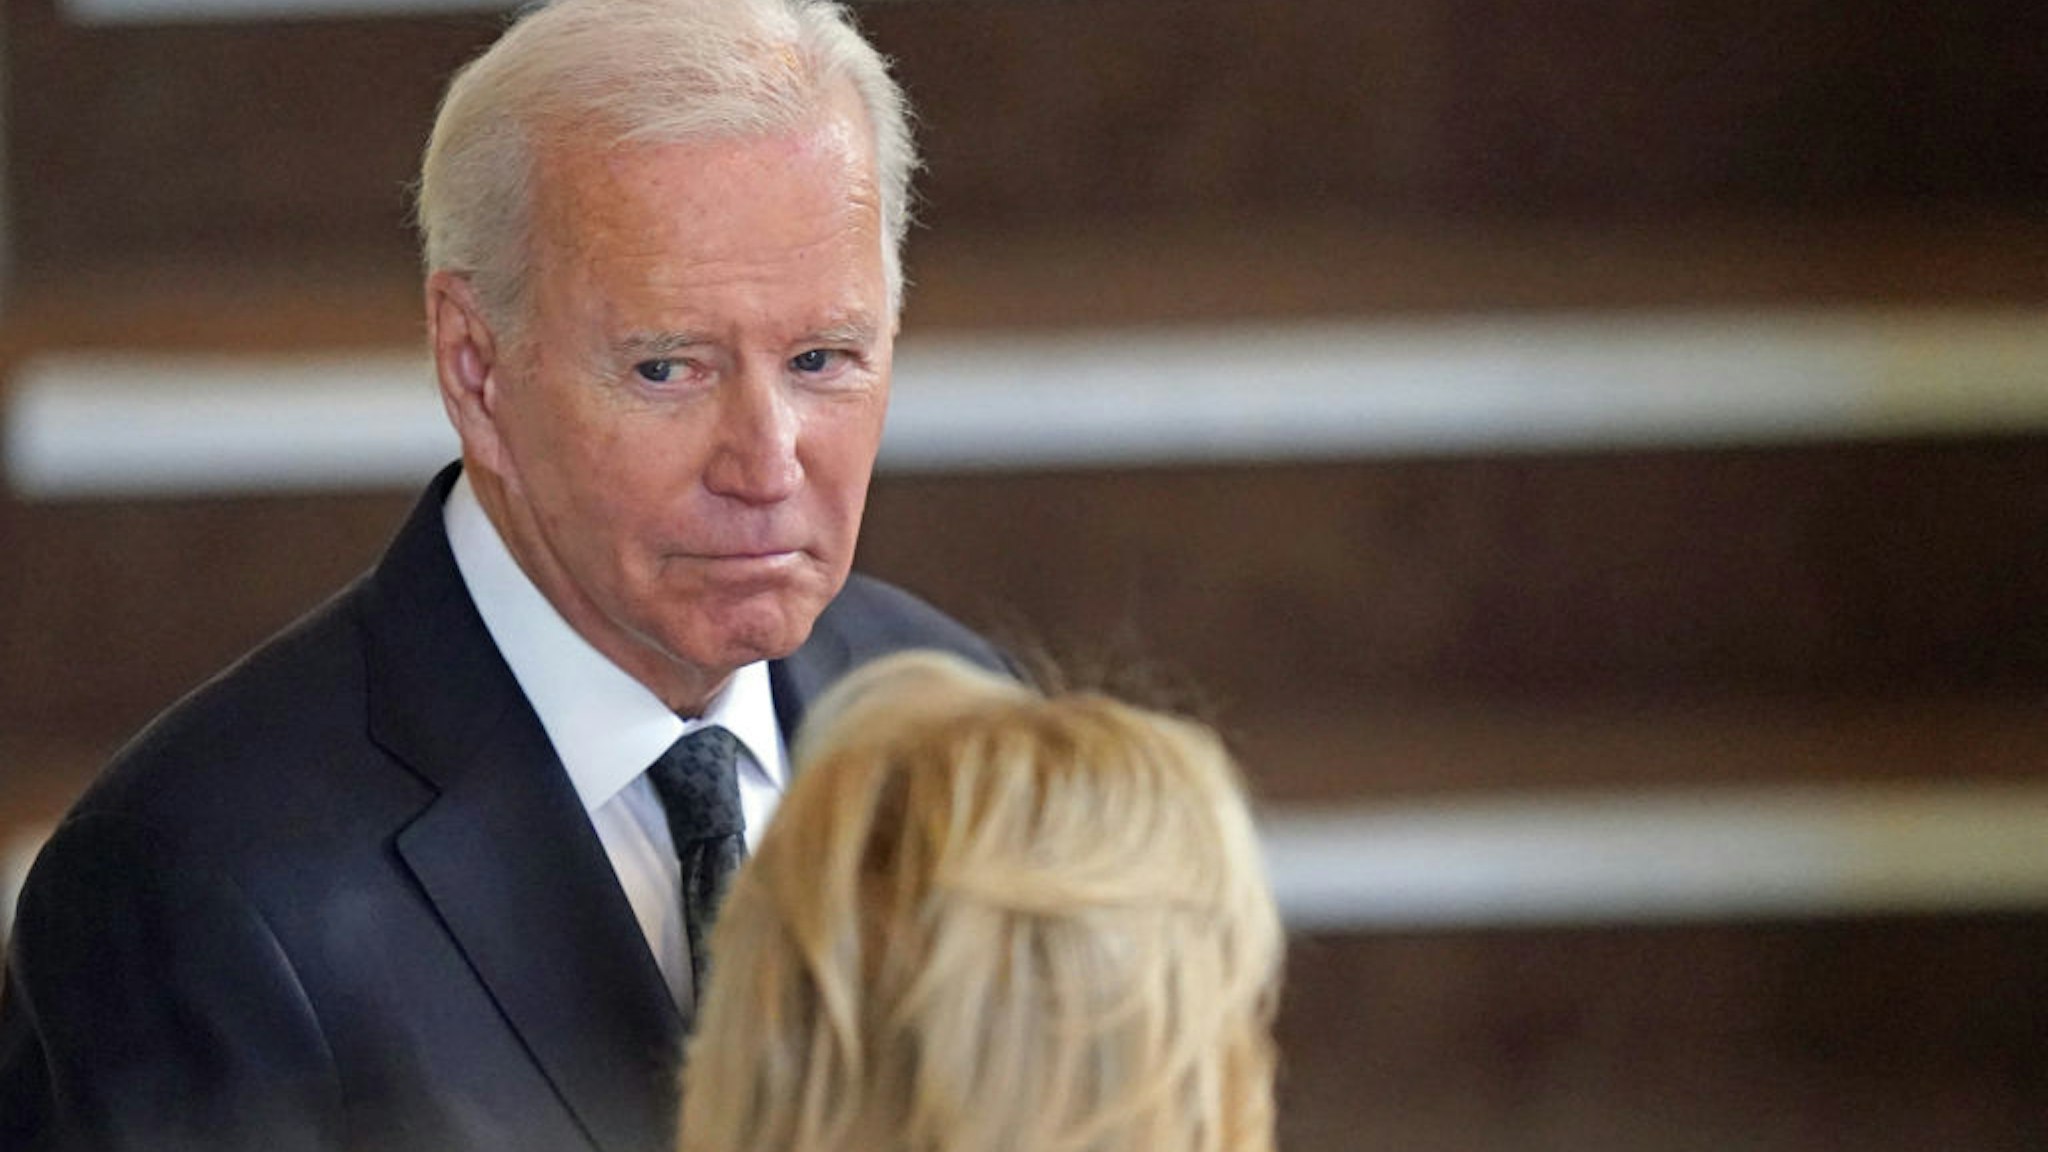 US President Joe Biden and First Lady Jill Biden pay their respects as they view the coffin of Queen Elizabeth II, as it Lies in State inside Westminster Hall, at the Palace of Westminster in London on September 18, 2022. - Queen Elizabeth II will lie in state in Westminster Hall inside the Palace of Westminster, until 0530 GMT on September 19, a few hours before her funeral, with huge queues expected to file past her coffin to pay their respects. (Photo by Jacob King / POOL / AFP) (Photo by JACOB KING/POOL/AFP via Getty Images)